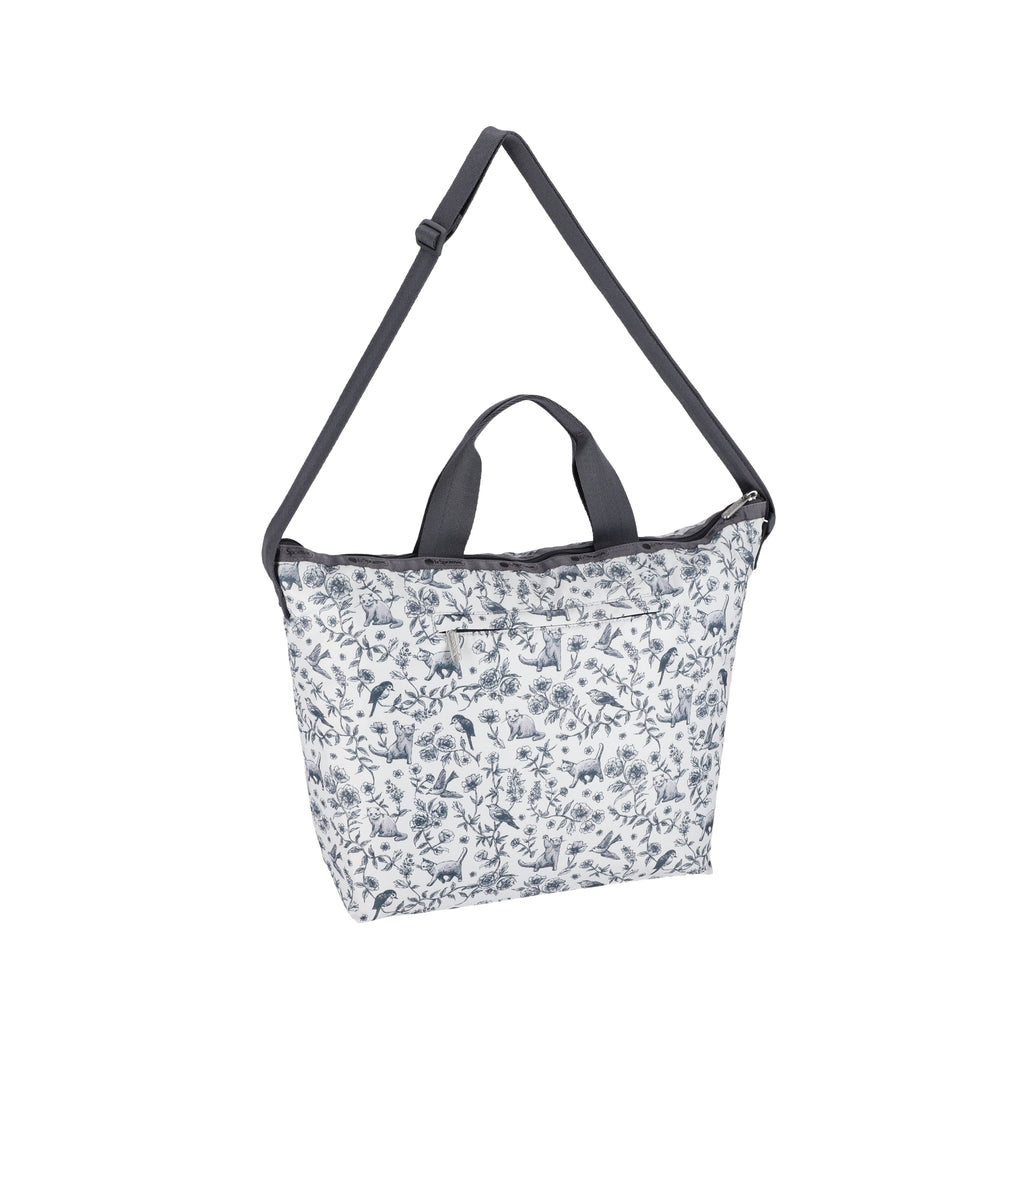 Deluxe Easy Carry Tote - 25154406088752